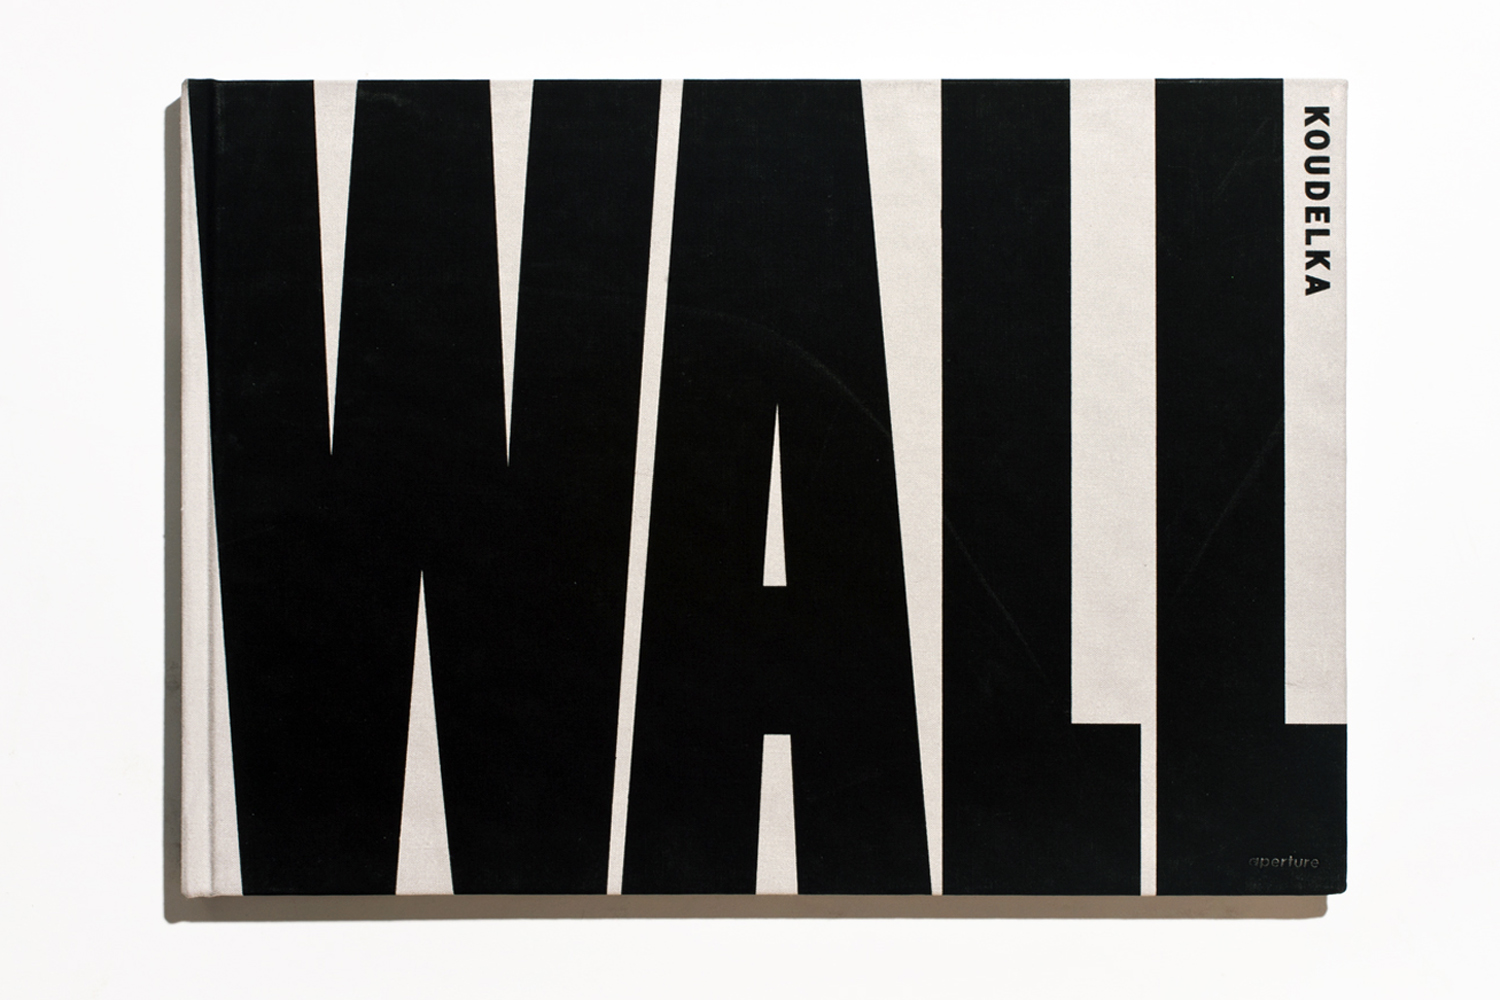 Wall by Josef Koudelka, published by Aperture, selected by Geoff Dyer, author.